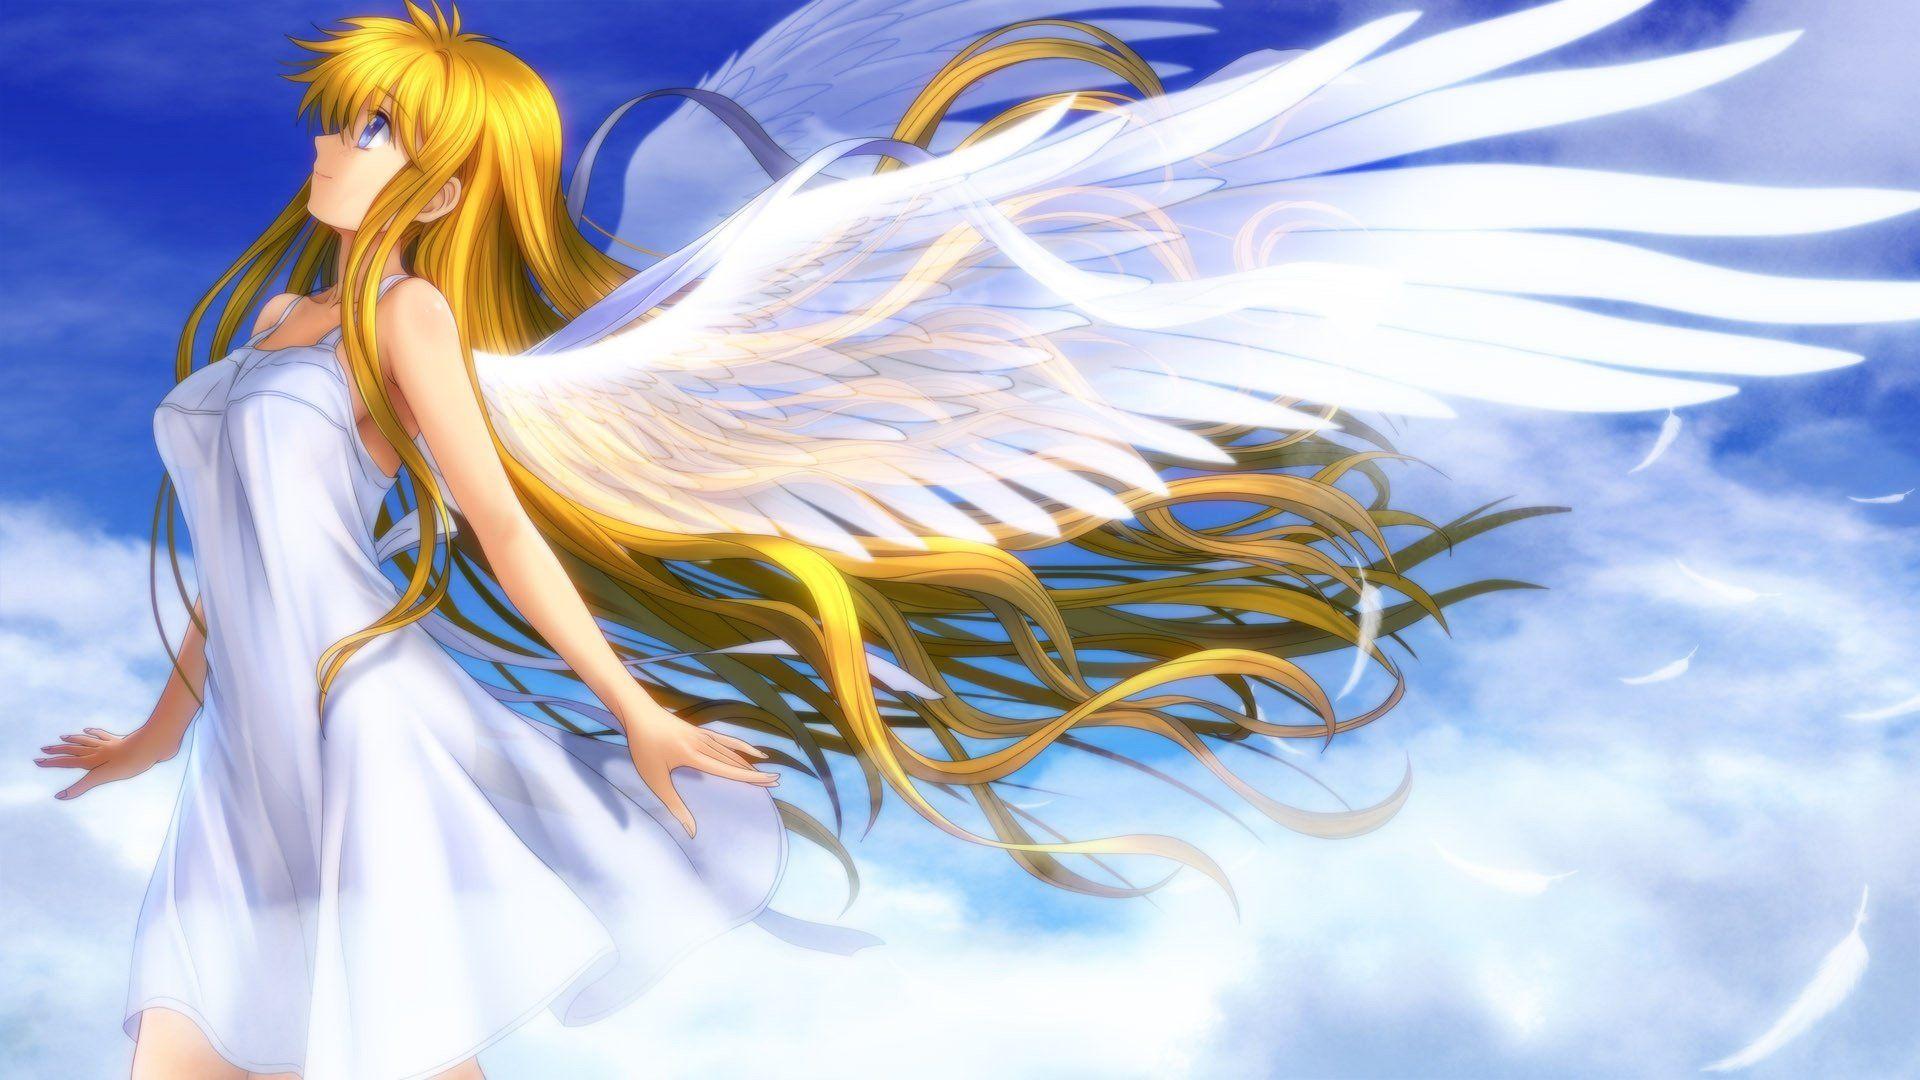 Pretty Anime Angel feathers wallpaper white wings file